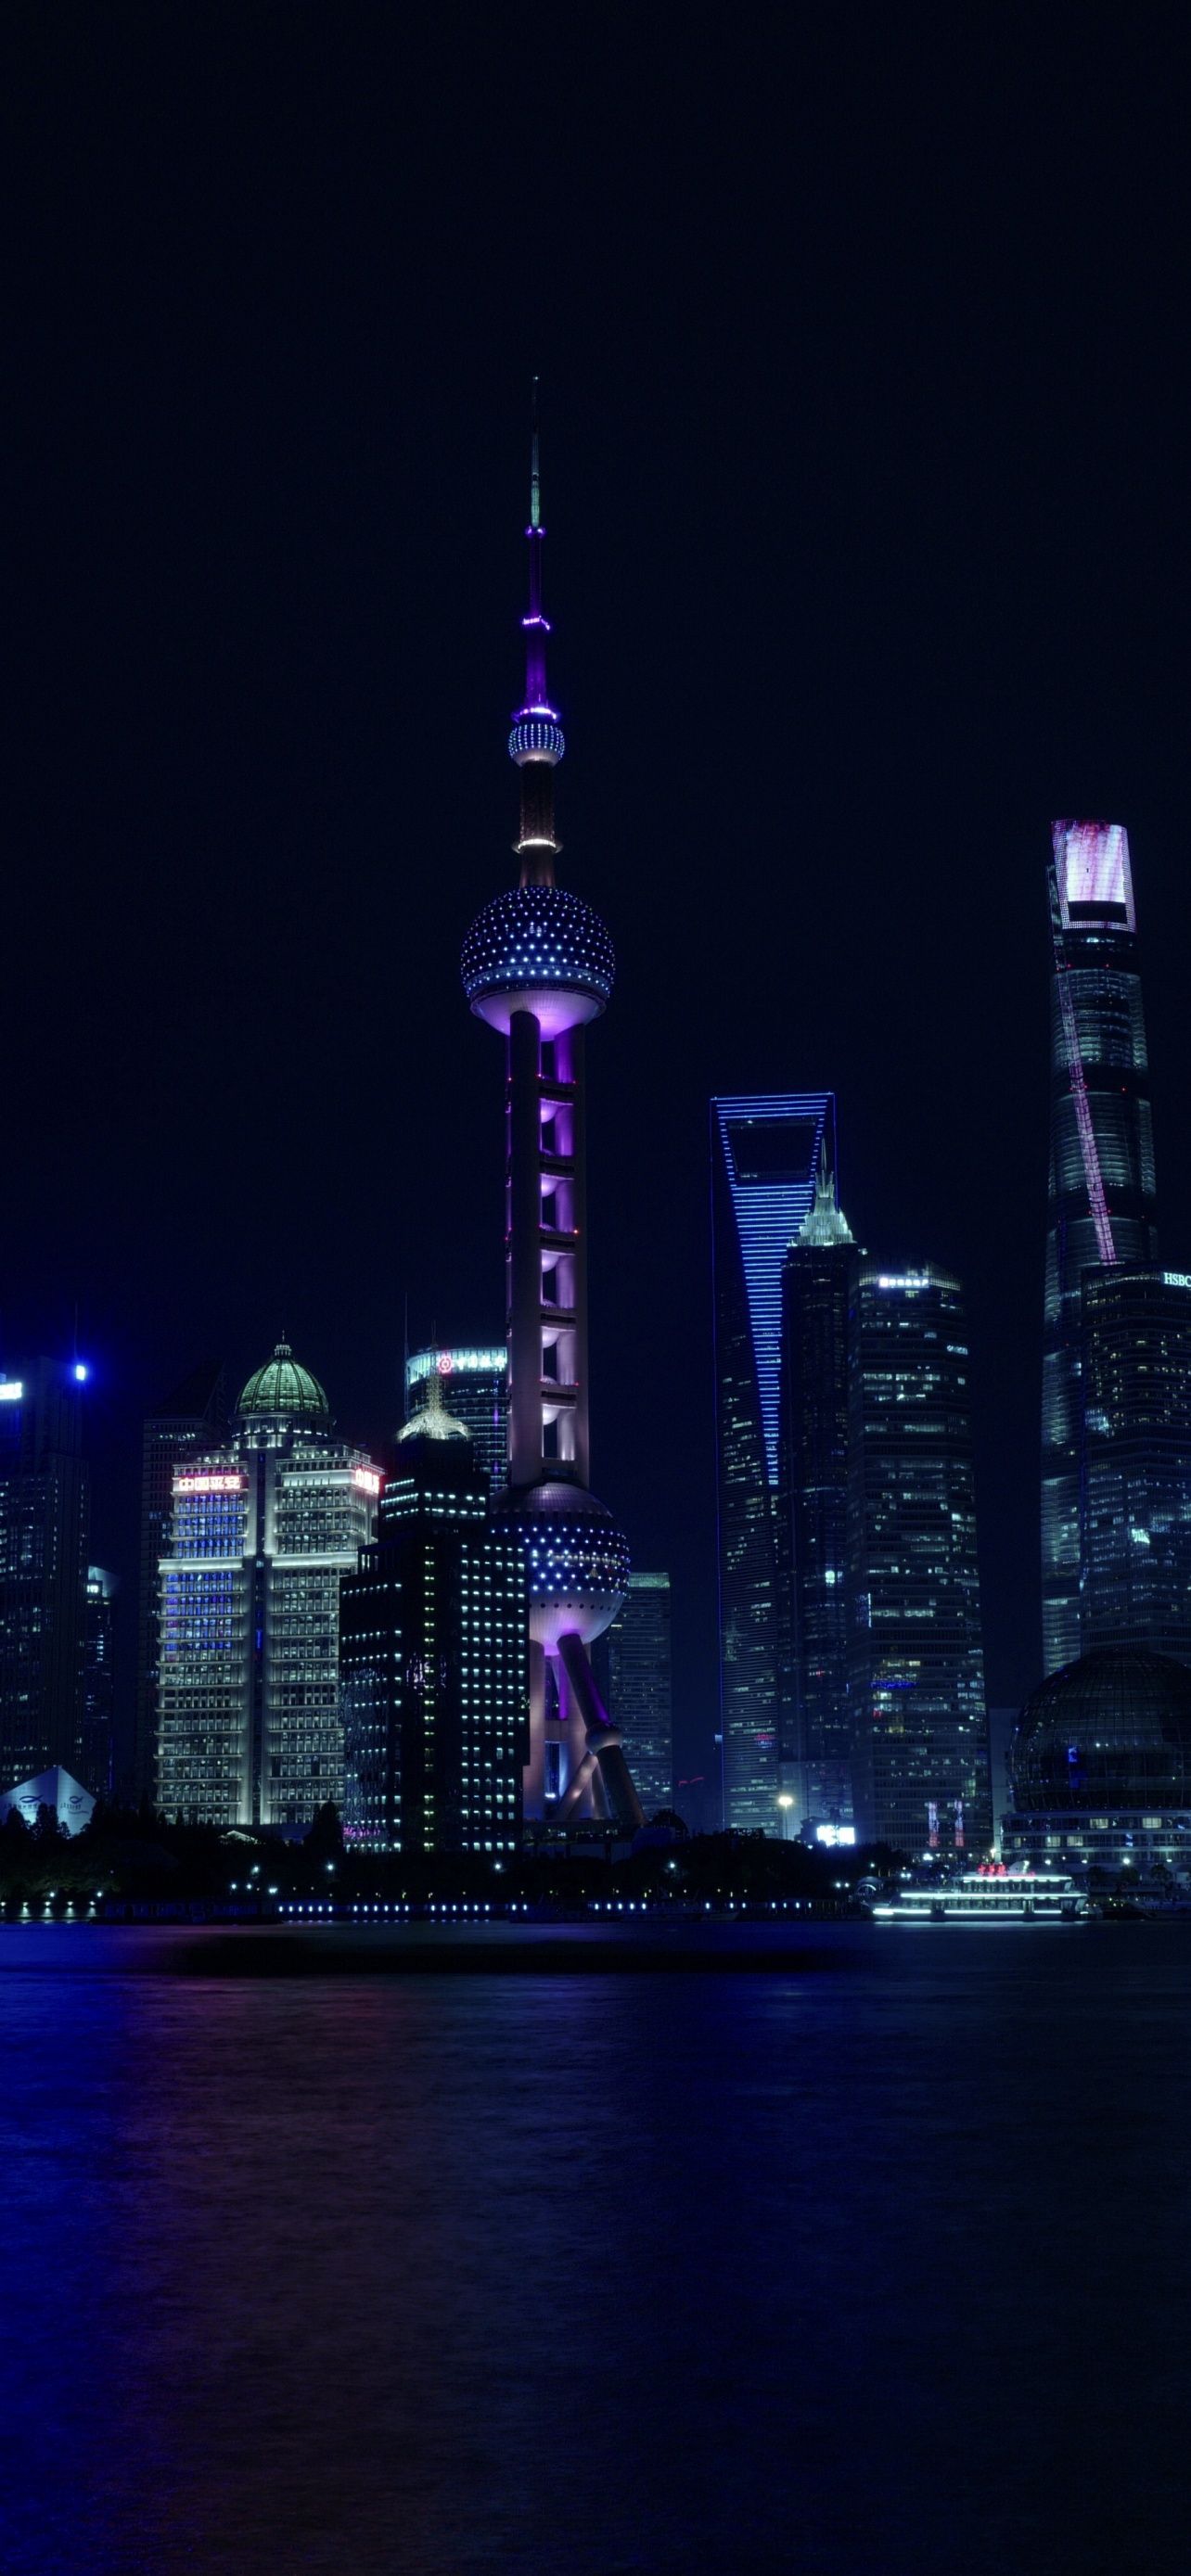 The oriental pearl tower is lit up at night in Shanghai, China. - Chinese